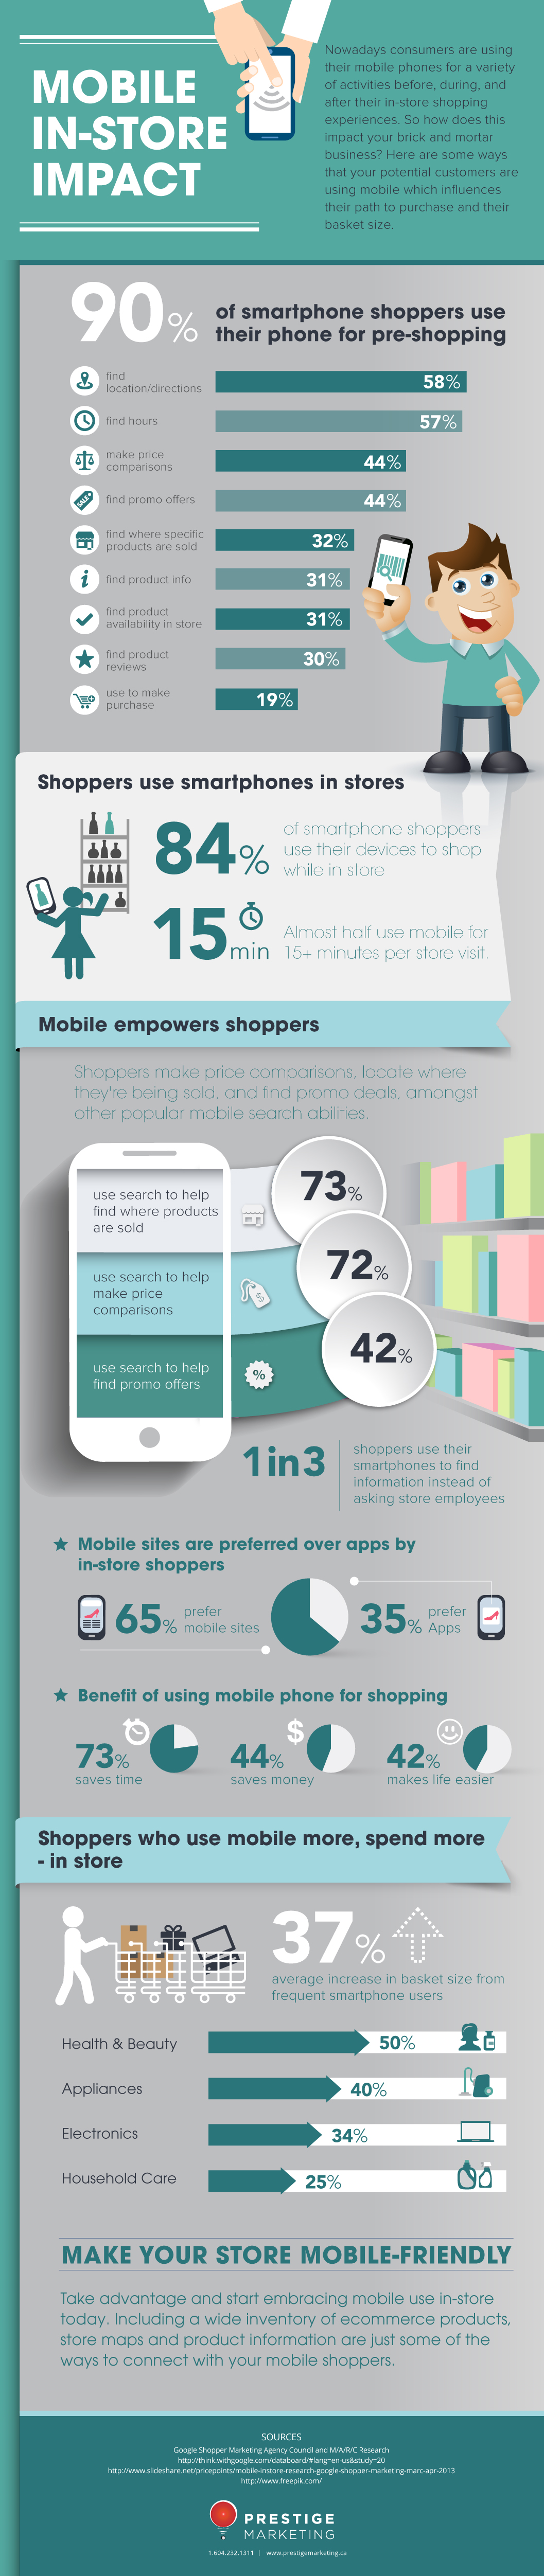 Mobile Usage Impact In-Store Purchase - Infographic